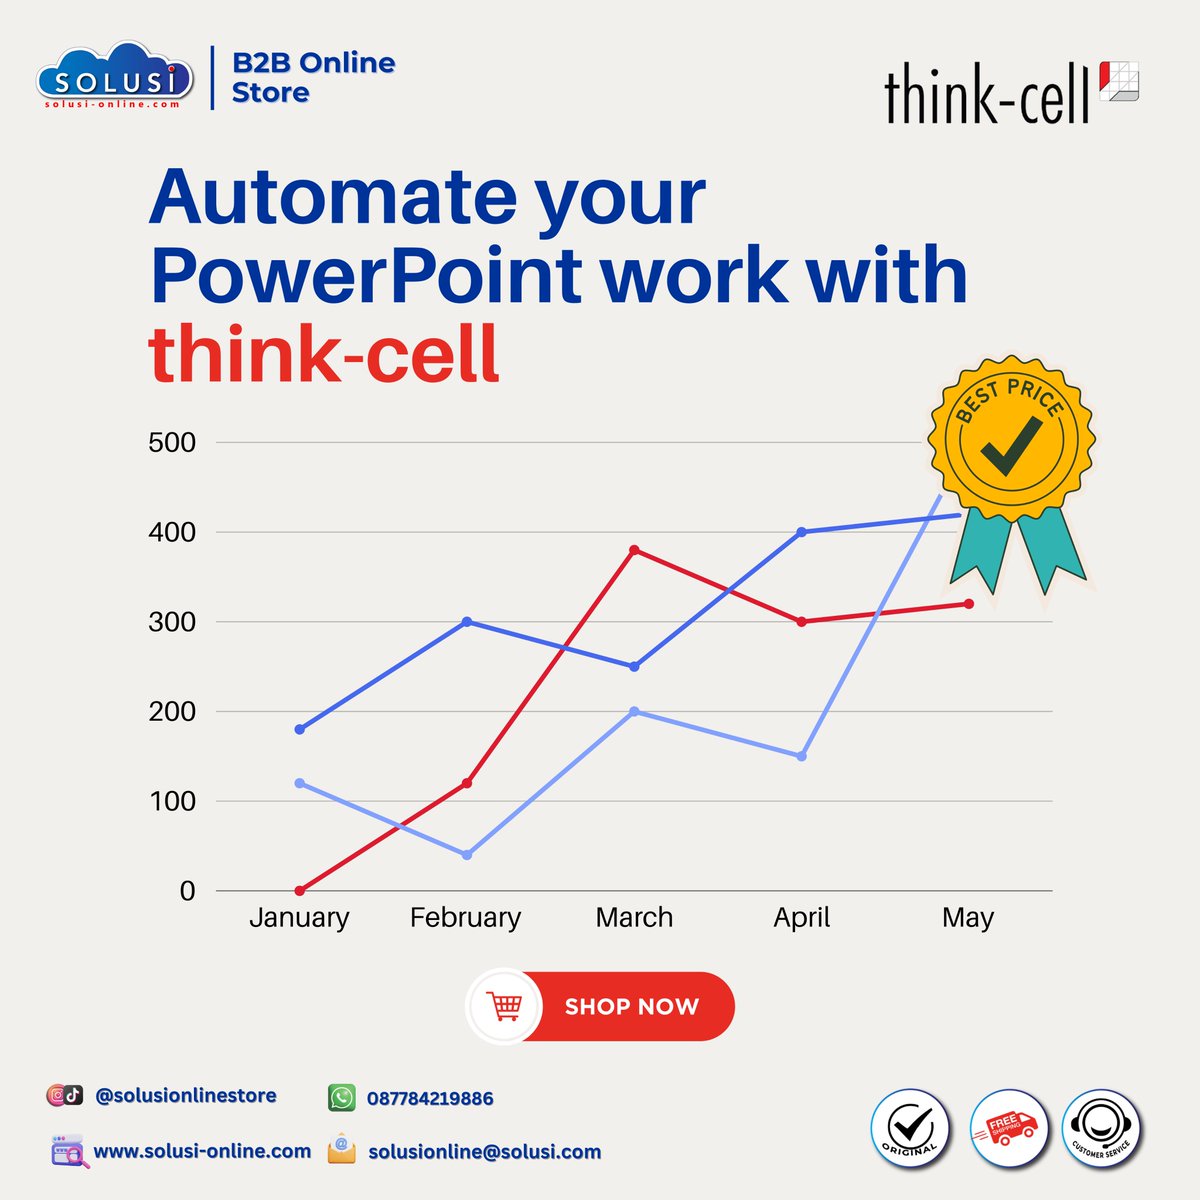 Say goodbye to tedious PowerPoint tasks! 🚀 With think-cell, automate your slide creation process and elevate your presentations to a whole new level of efficiency and style. 🎨✨ 

solusi-online.com/product/think-…

#thinkcell #SolusiOnlineStore #B2BOnlineStore